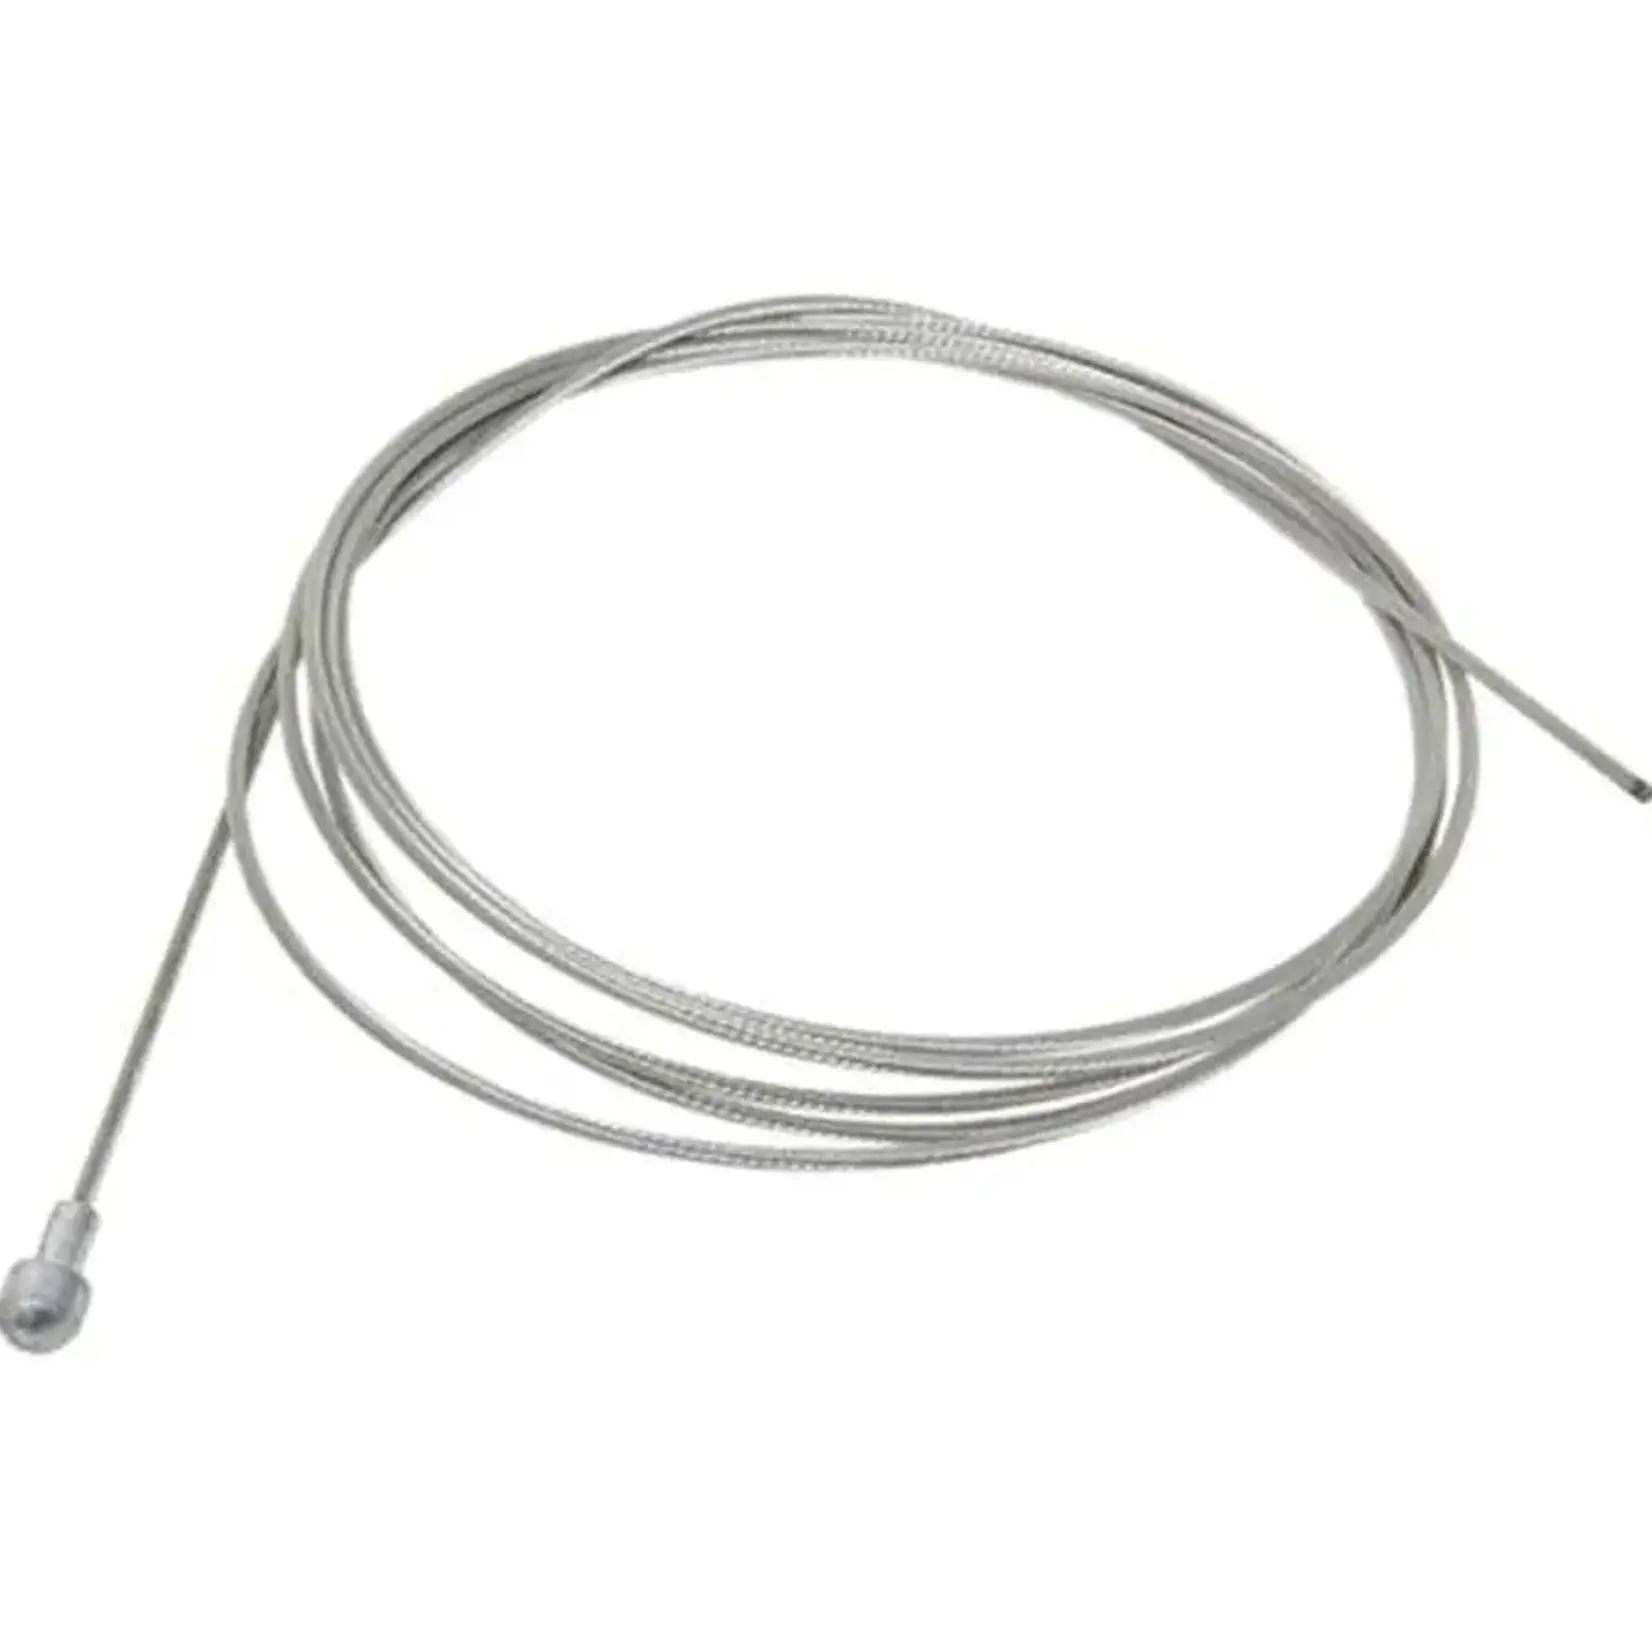 Shimano Shimano, PTFE coated stainless steel Brake Cable, Road, 1.6x2050mm